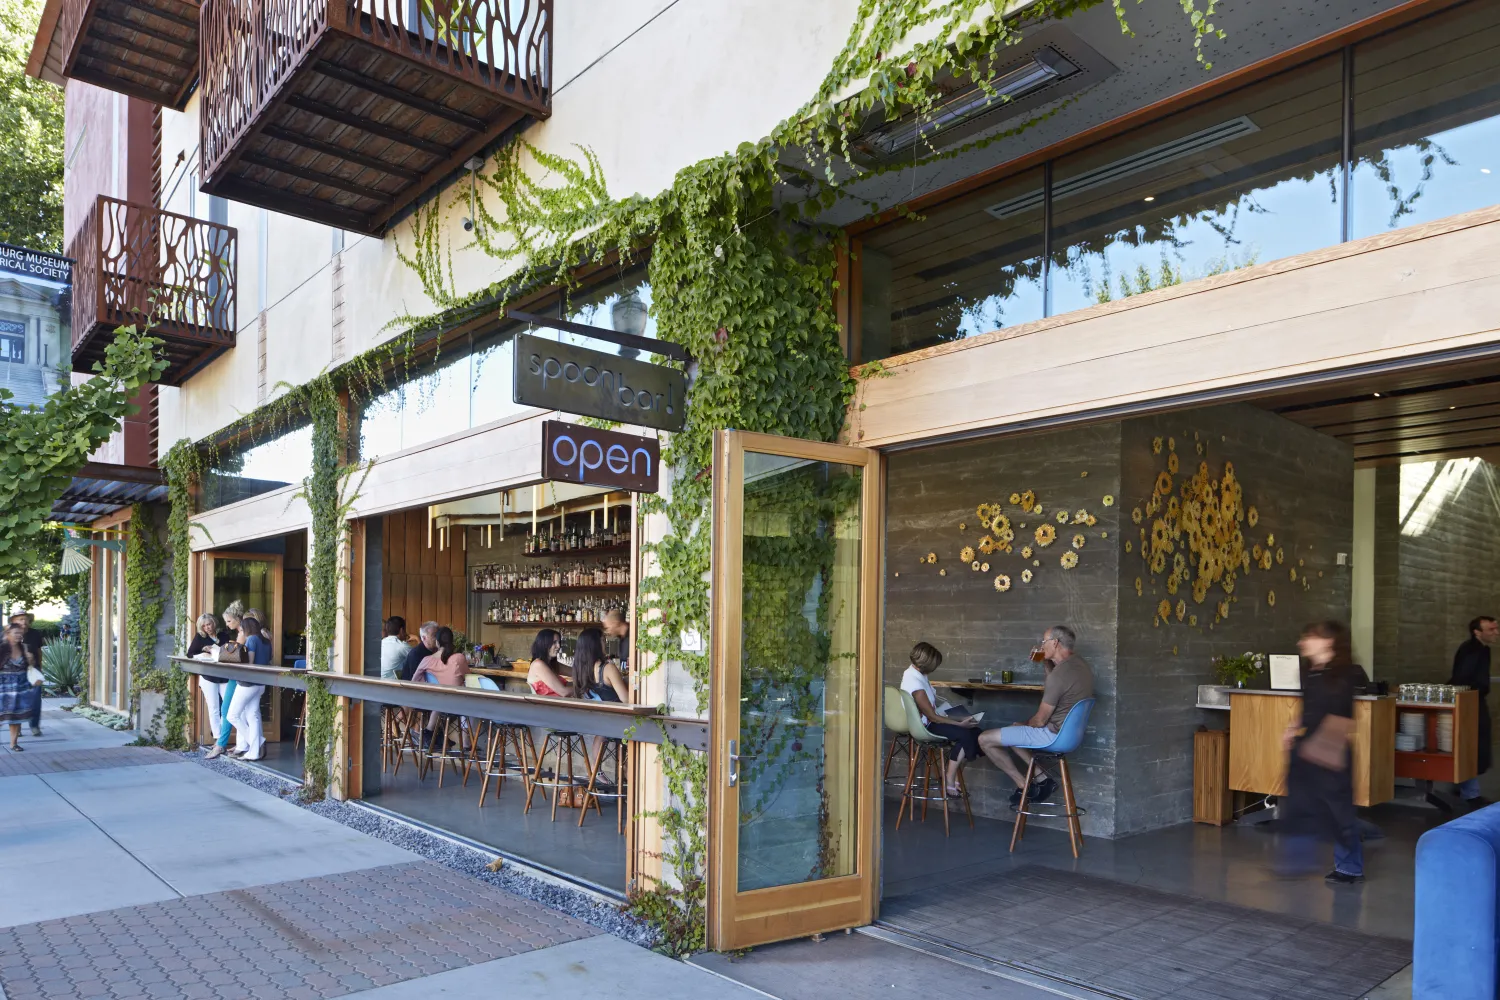 Spoonbar opens up to the street at h2hotel in Healdsburg, Ca.